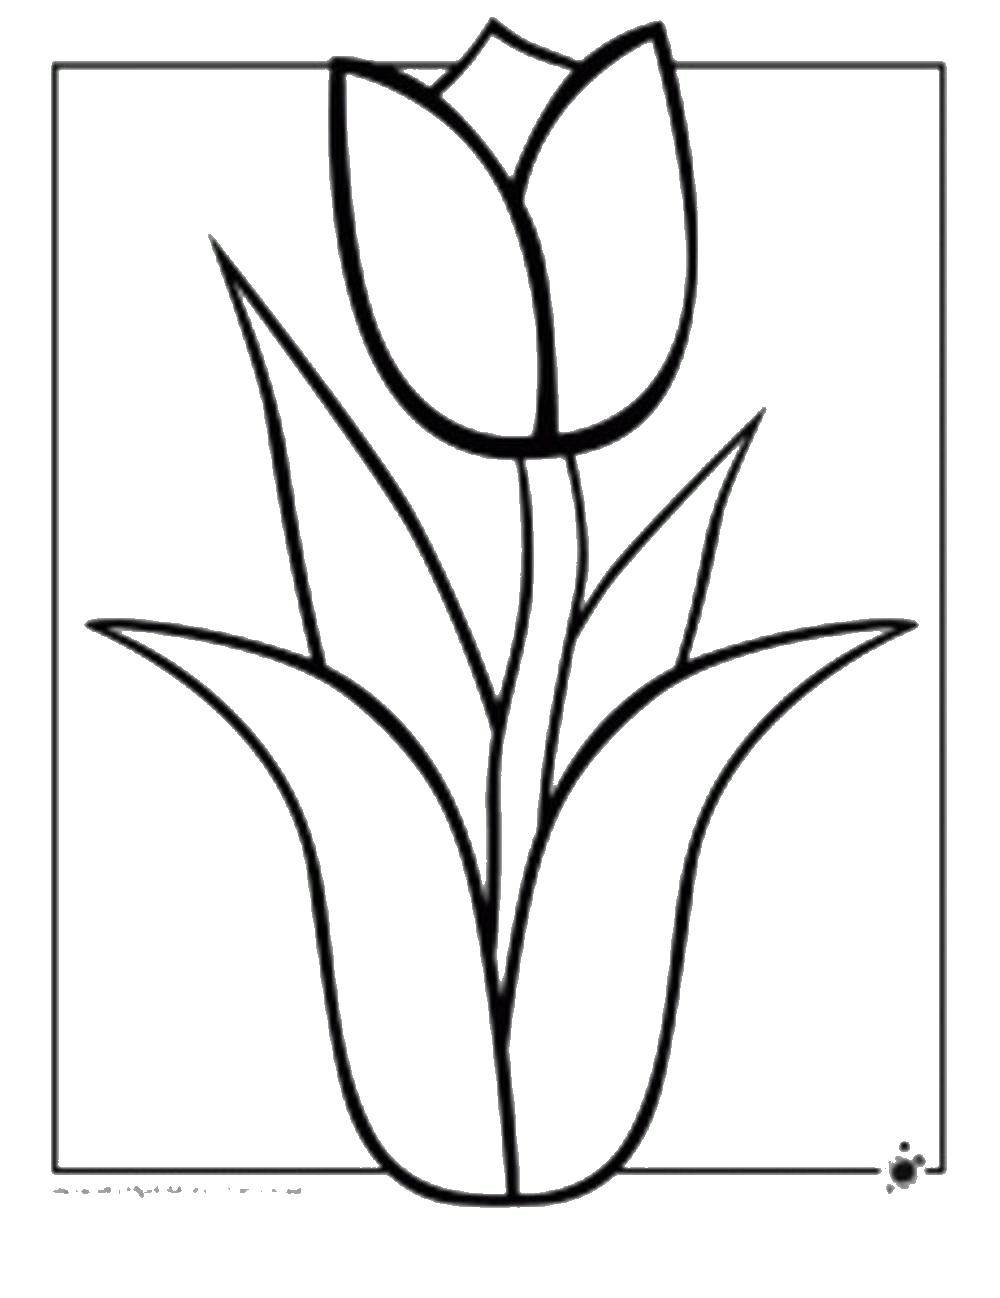 Coloring Tulip. Category For girls. Tags:  flowers, plants, buds, petals, Tulip.